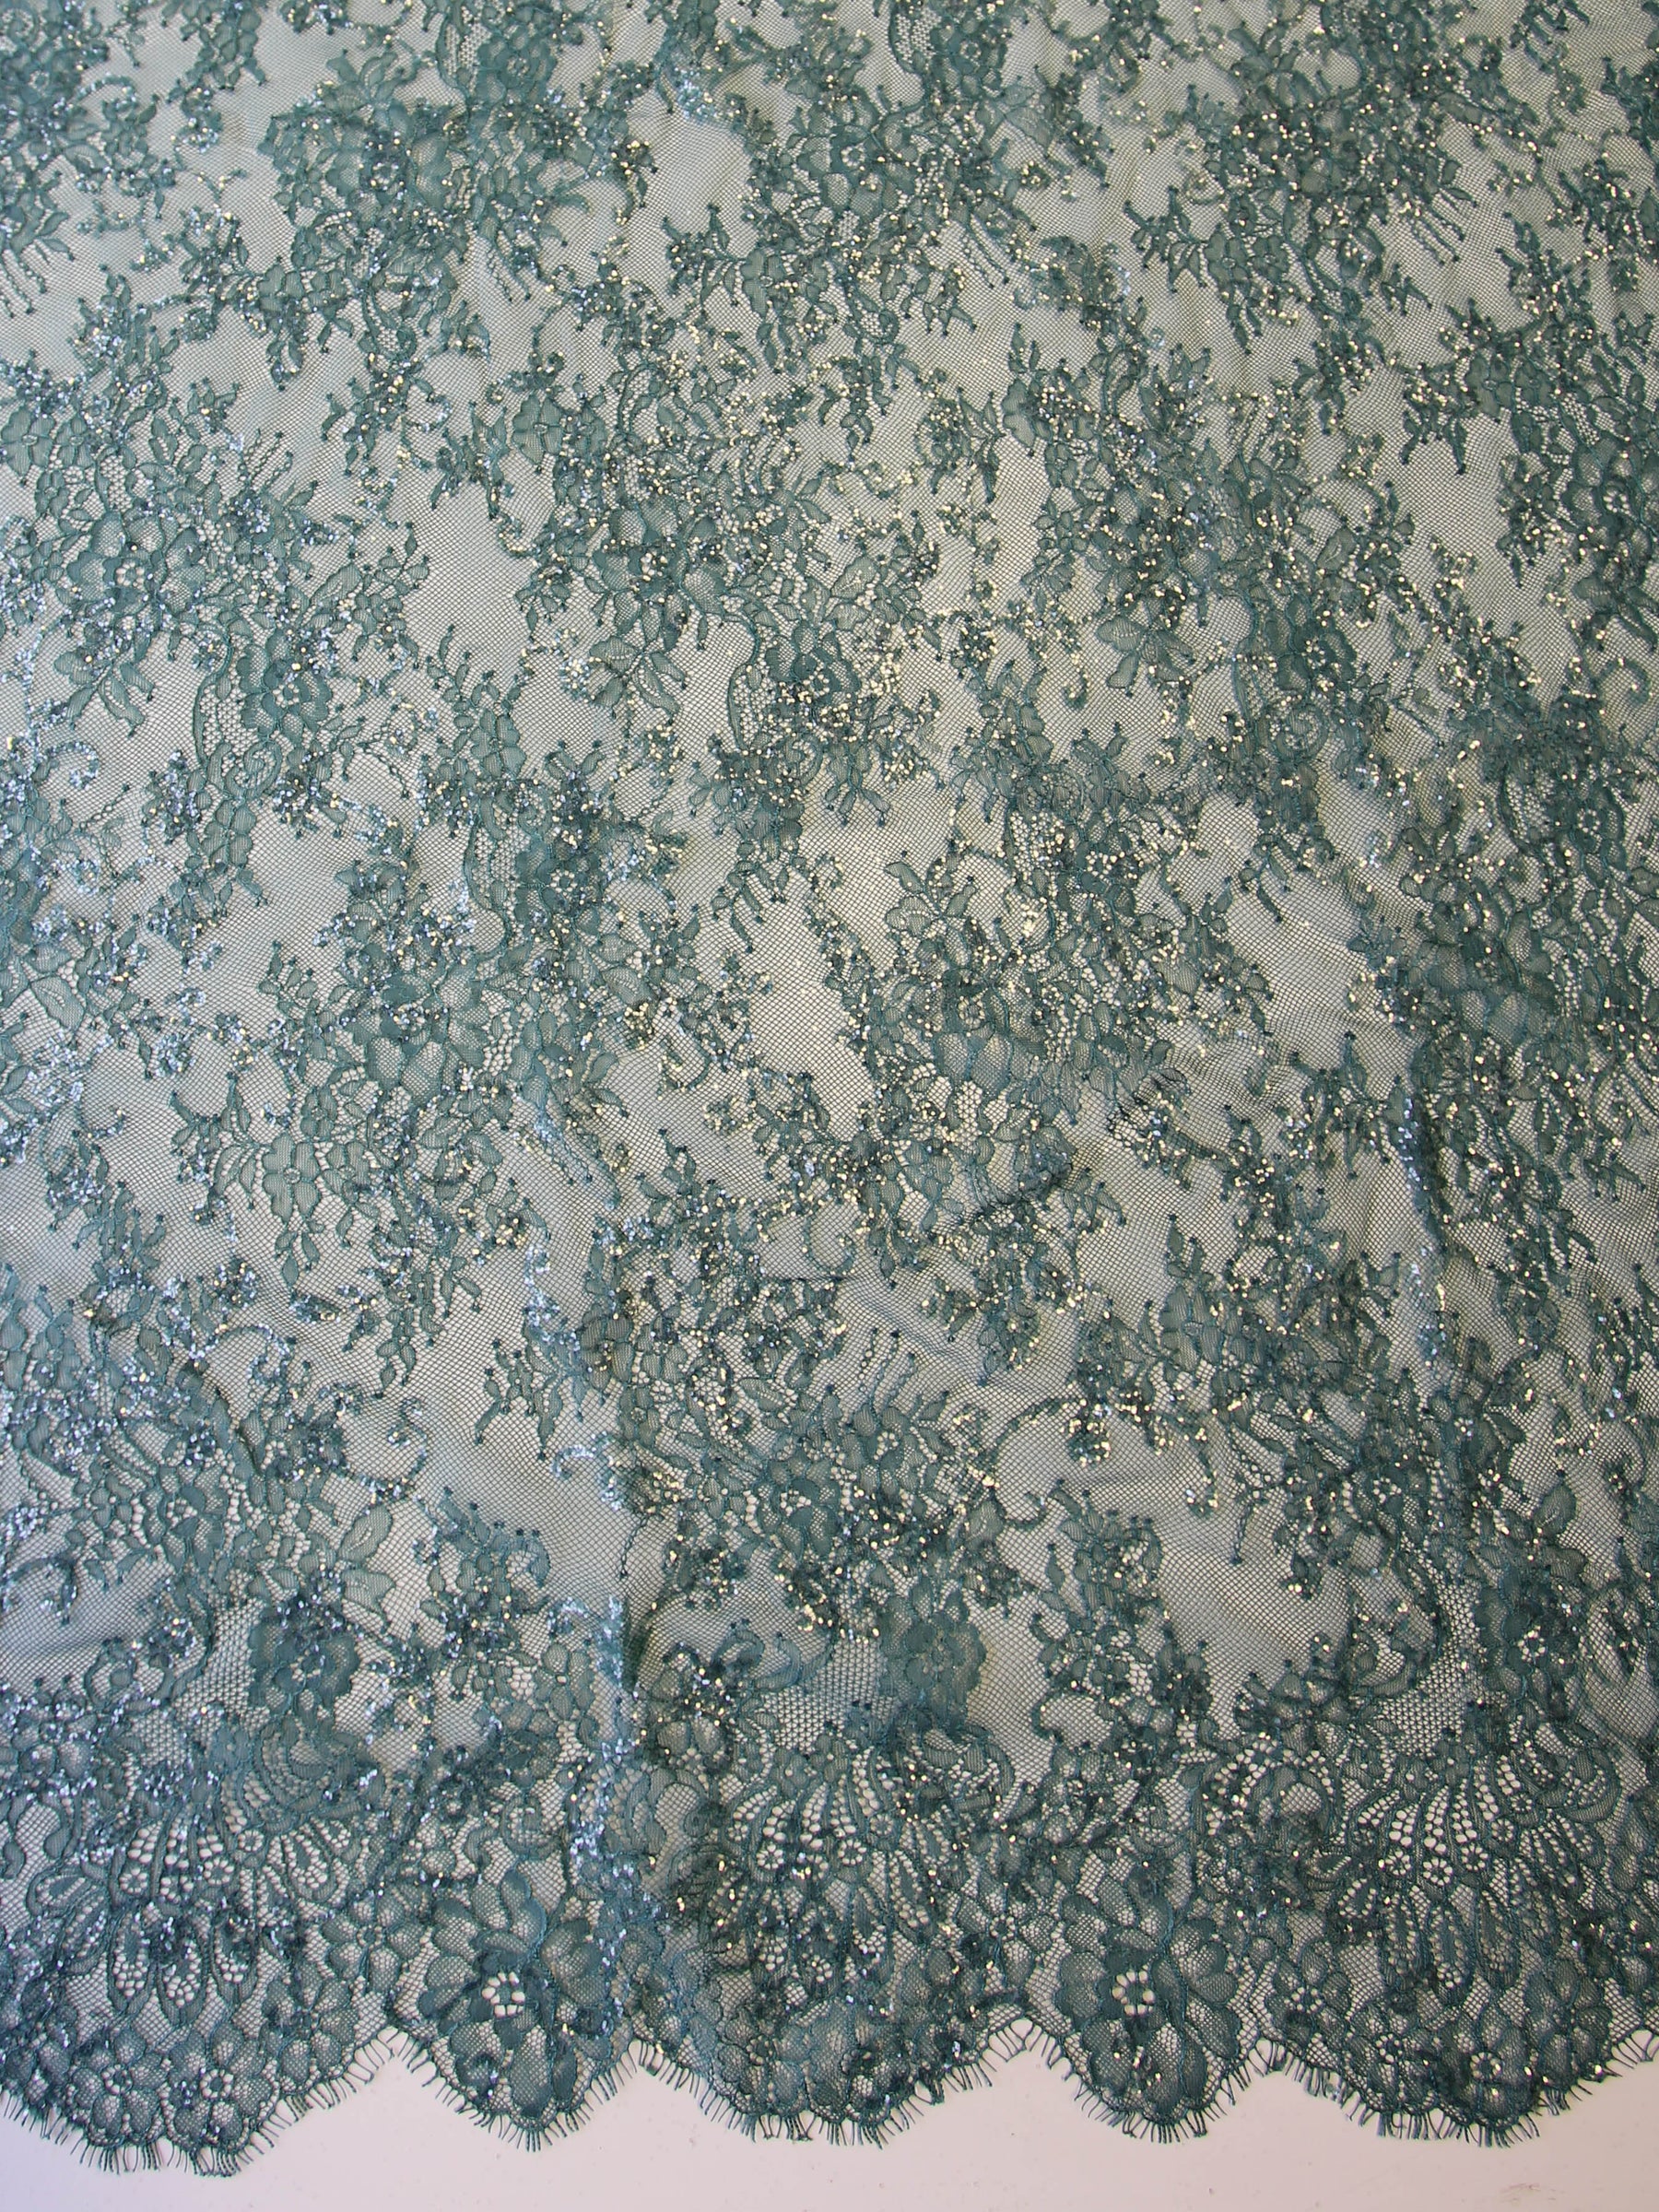 Teal Raschel Lace - Honor